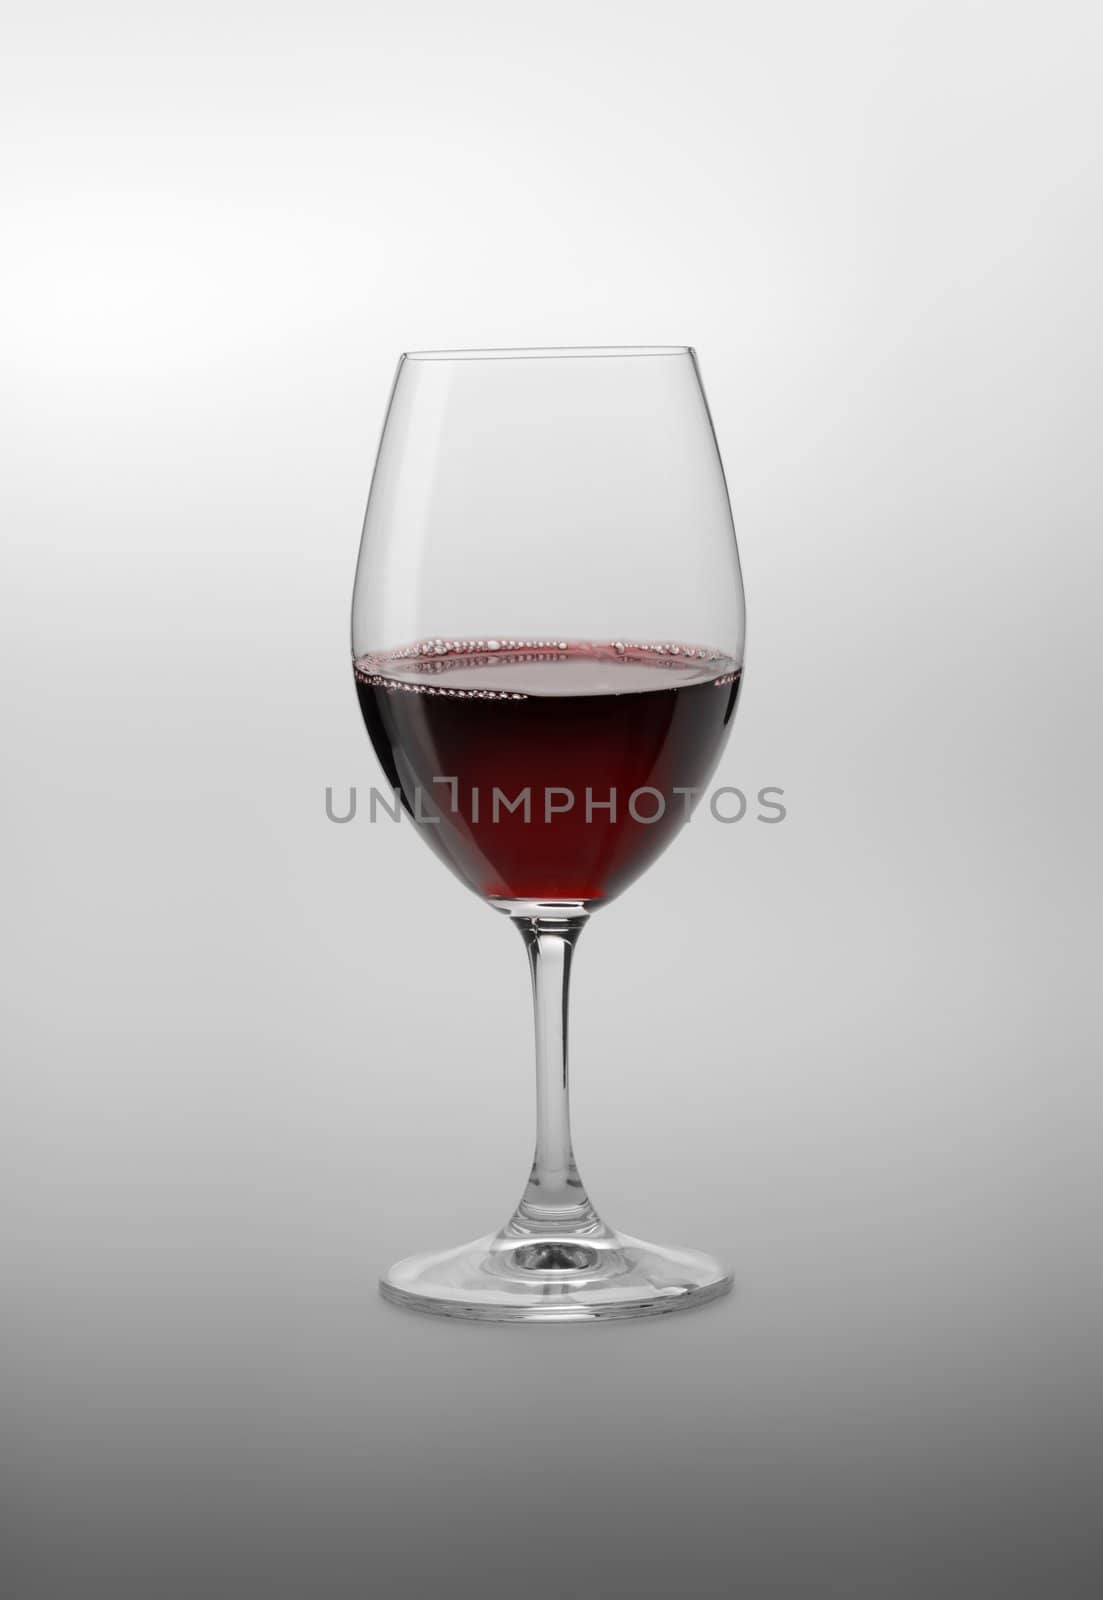 A Glass with red wine